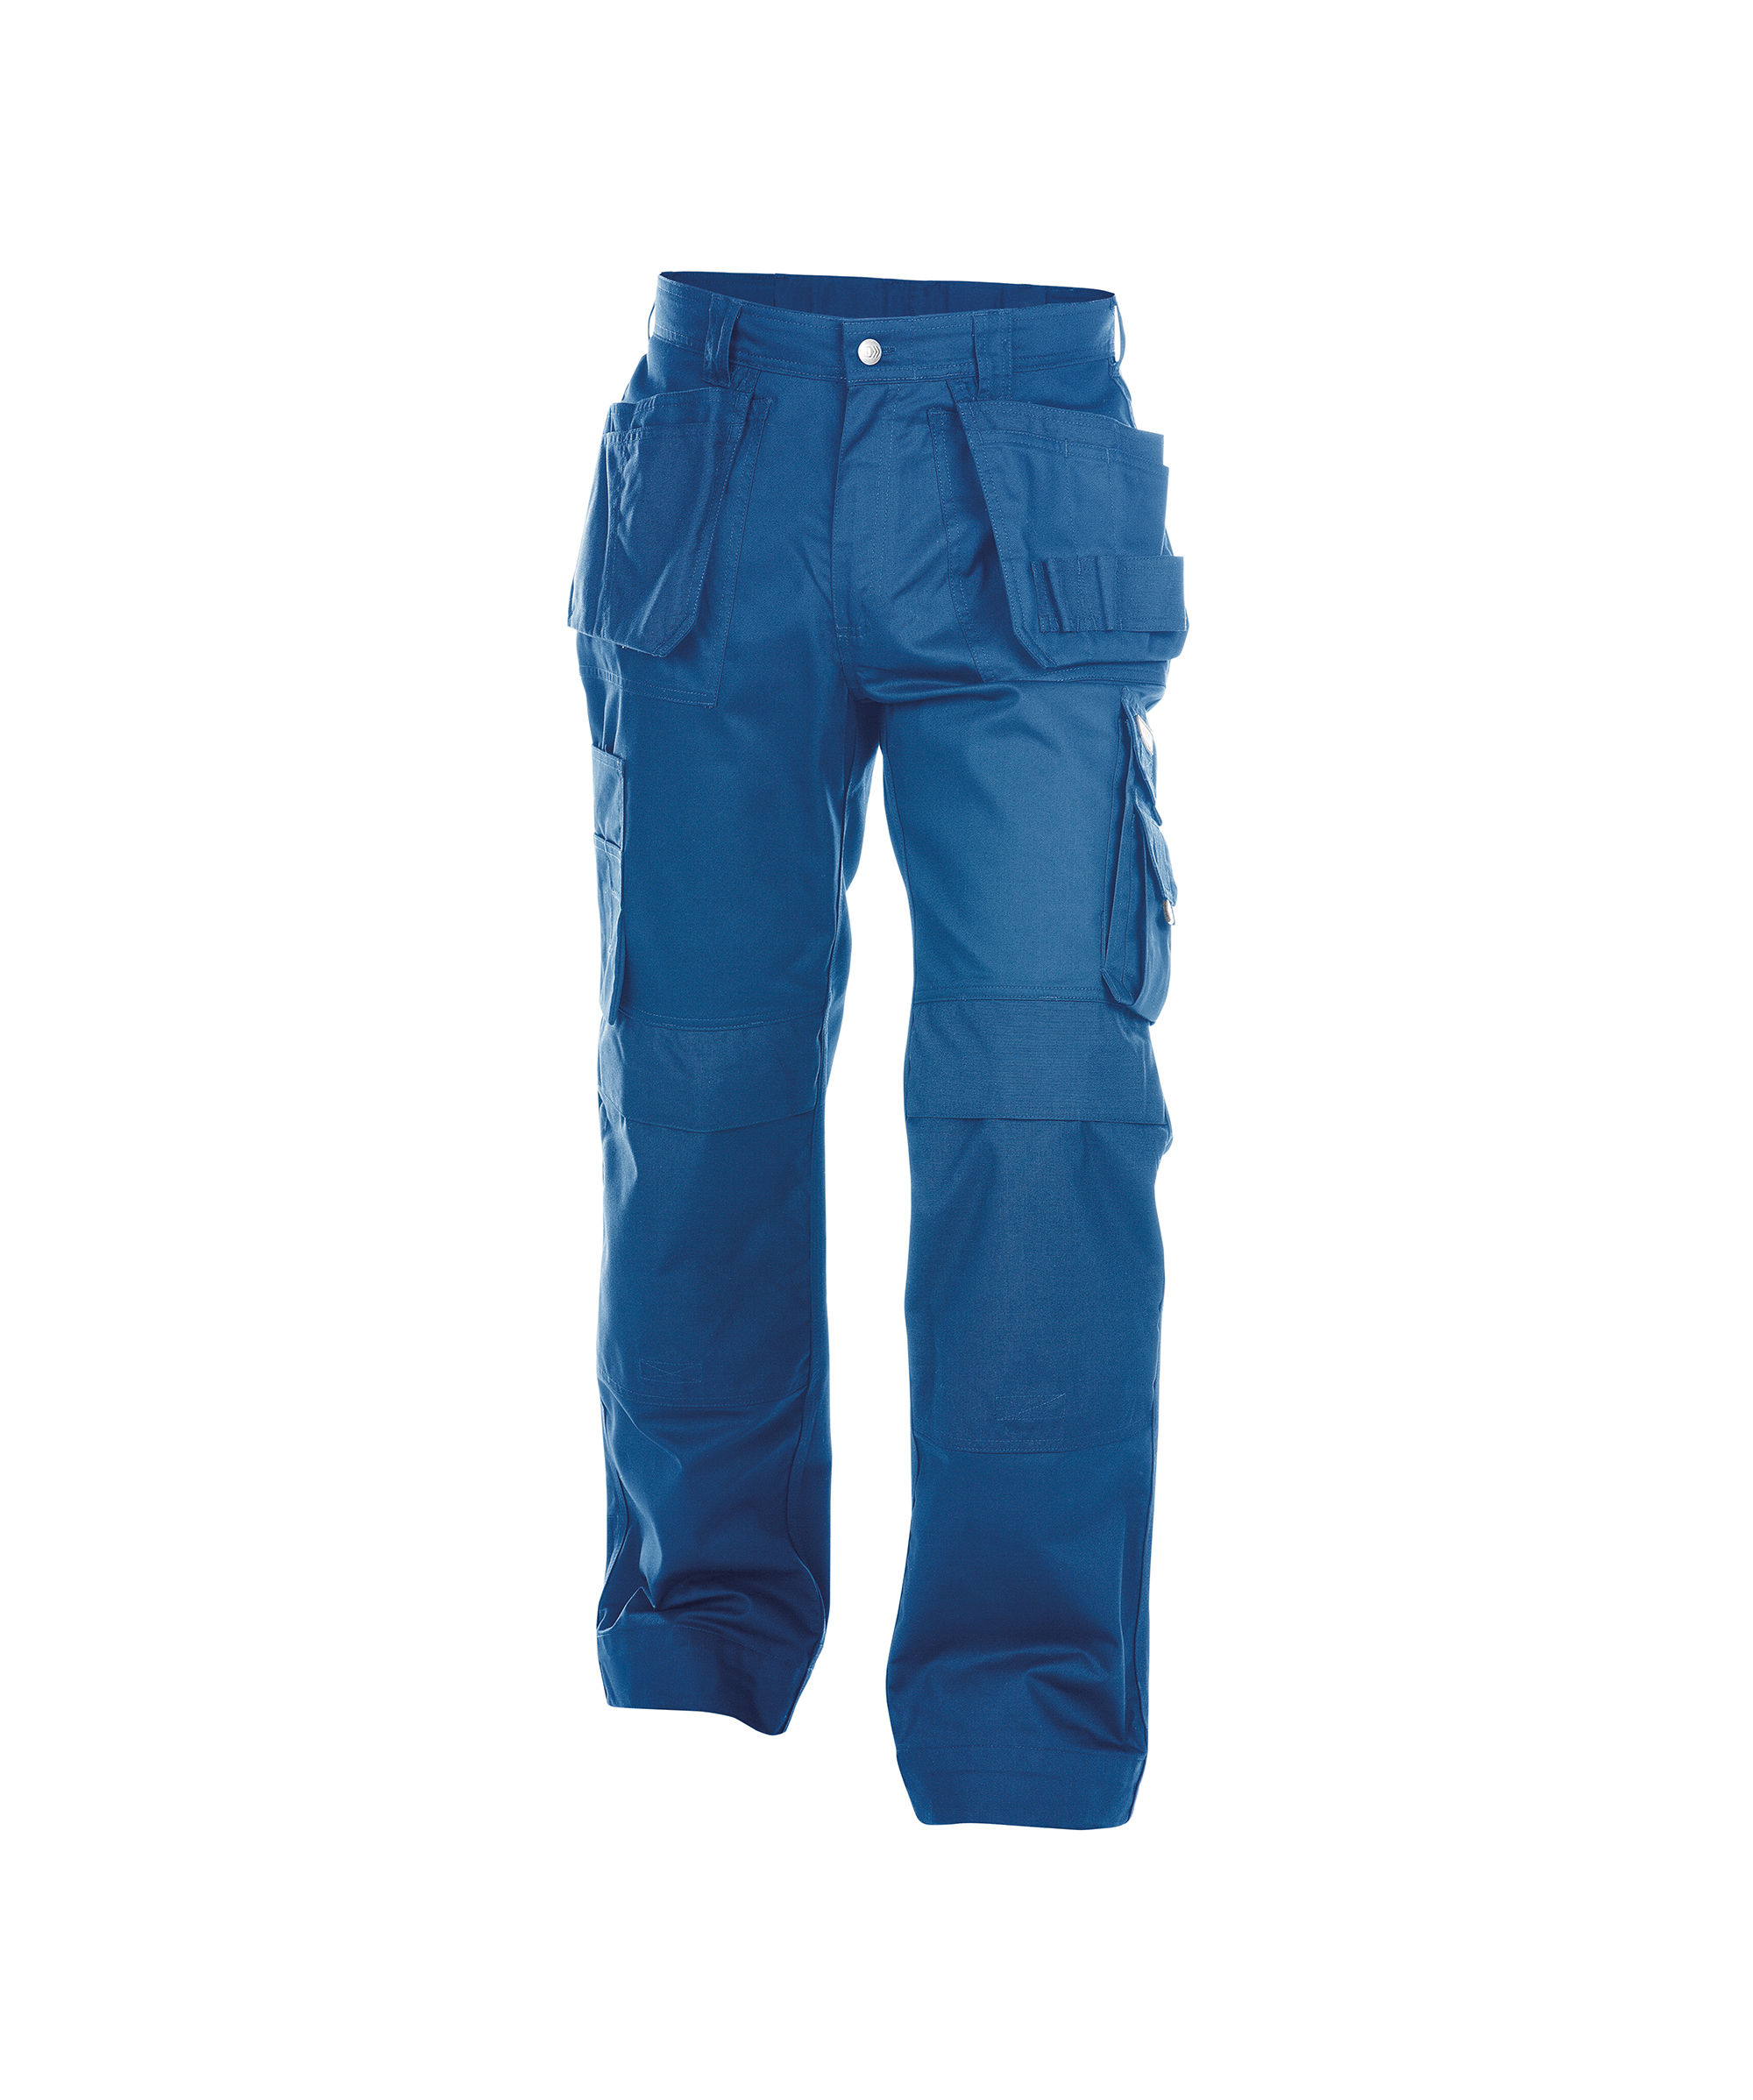 oxford_work-trousers-with-multi-pockets-and-knee-pockets_royal-blue_front.jpg